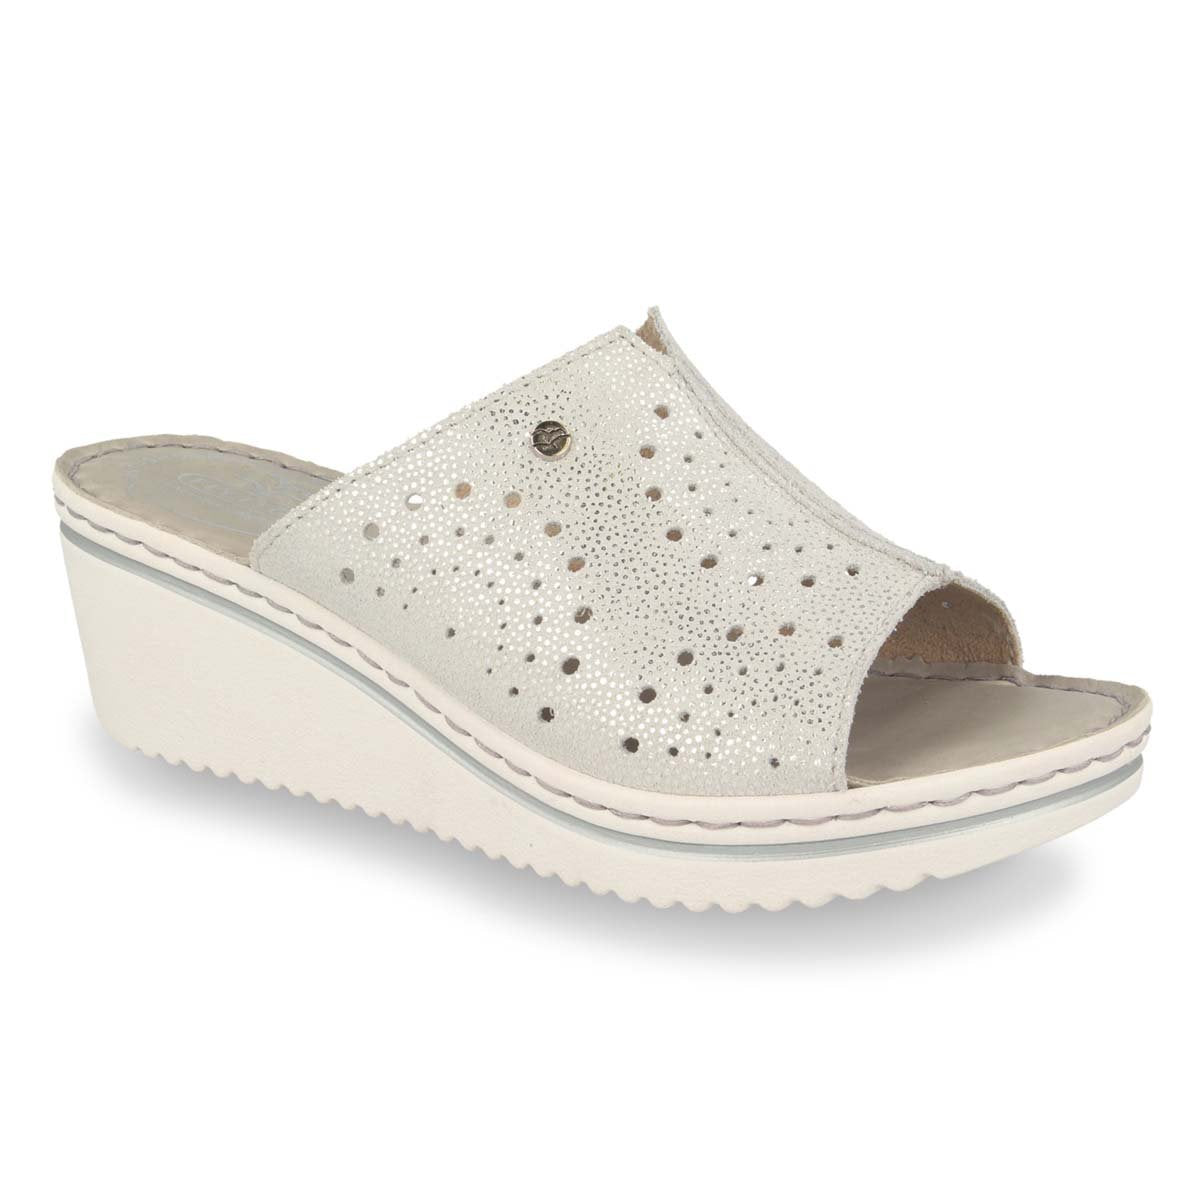 See the Trendy Wedge With Anti-Shock Cushioned Leather Insole in the colour BEIGE, available in various sizes